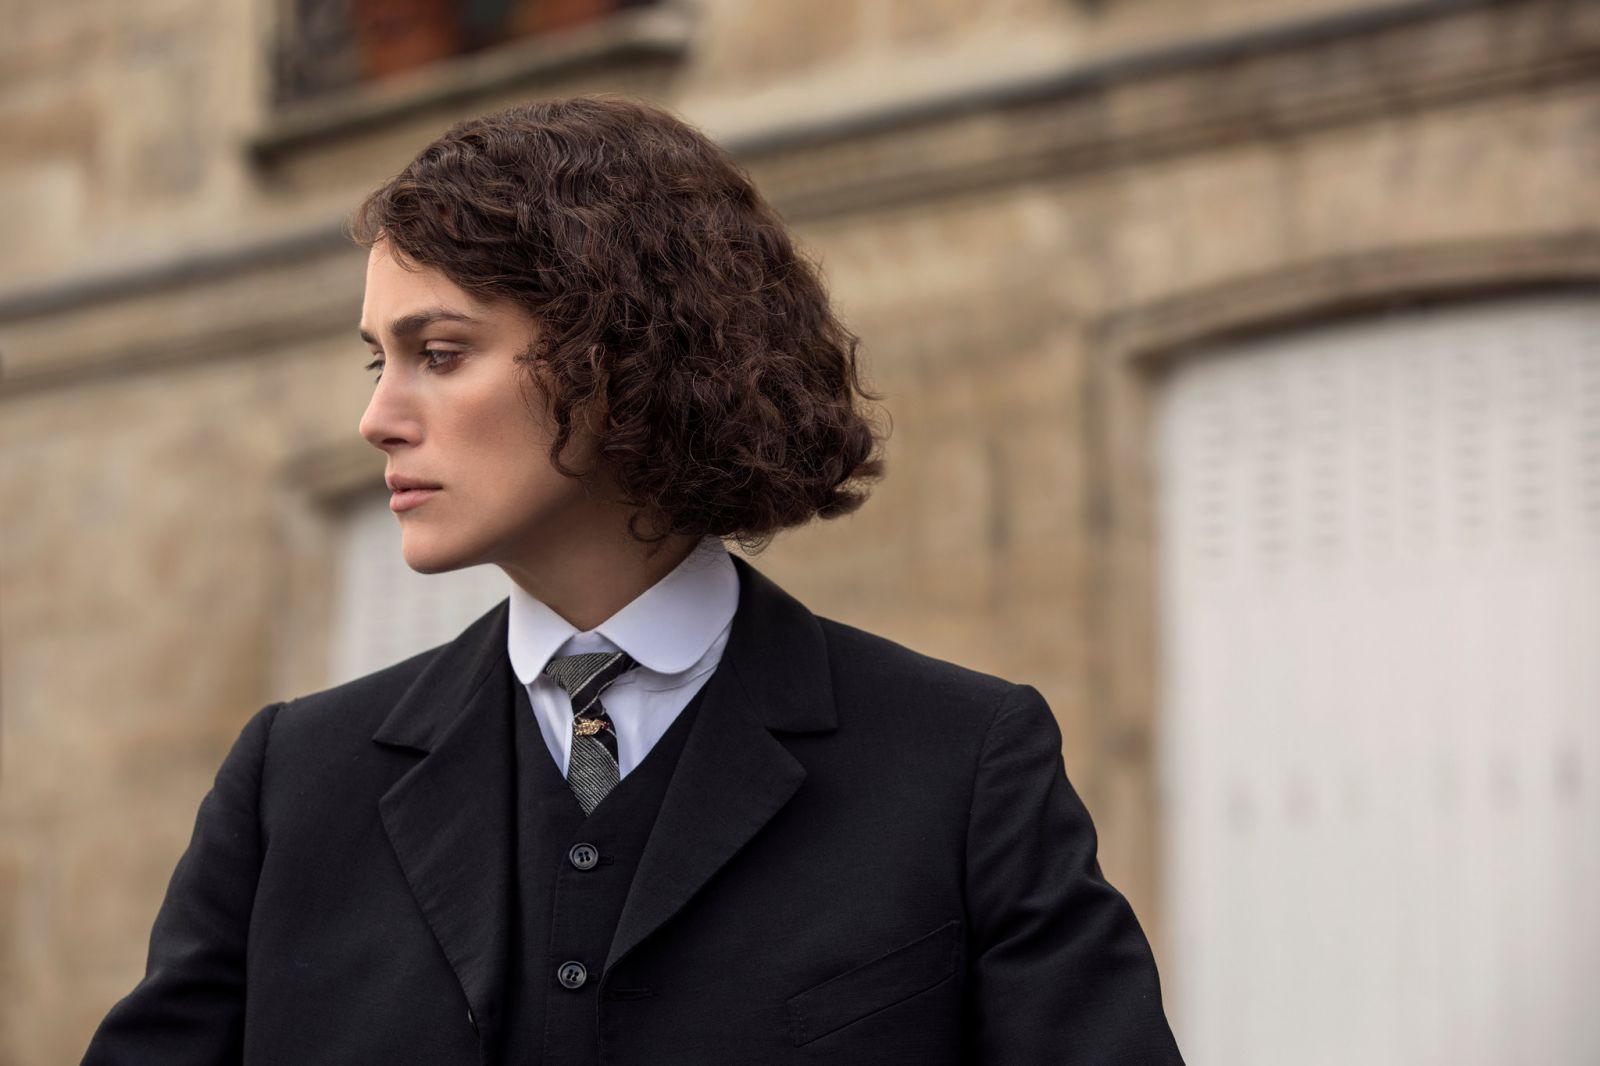 Keira Knightley plays the French writer Colette in this biographical movie directed by Wash Westmoreland